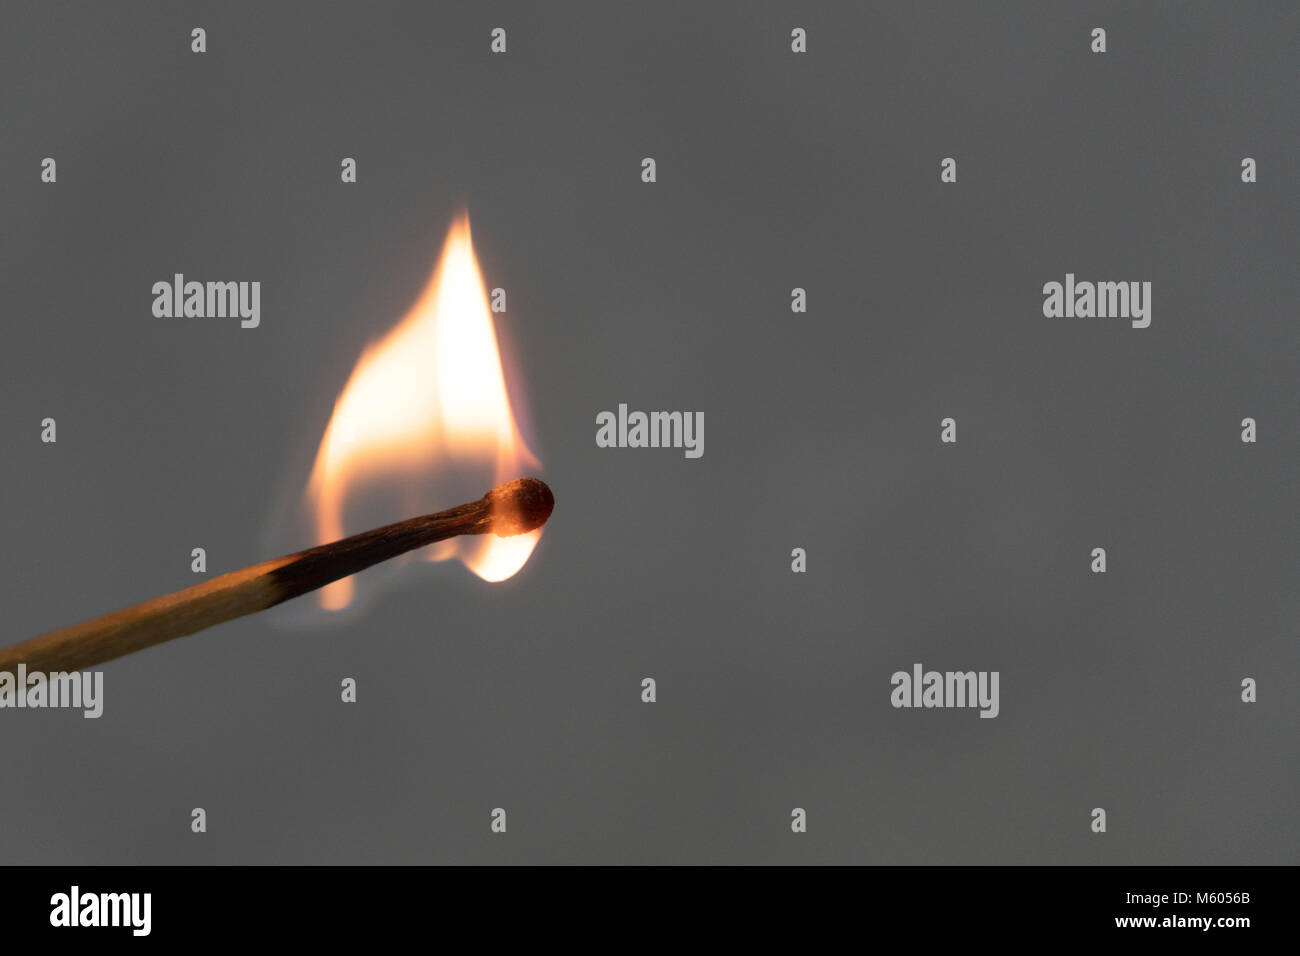 A lit match against a gray background. Fire burns. Stock Photo